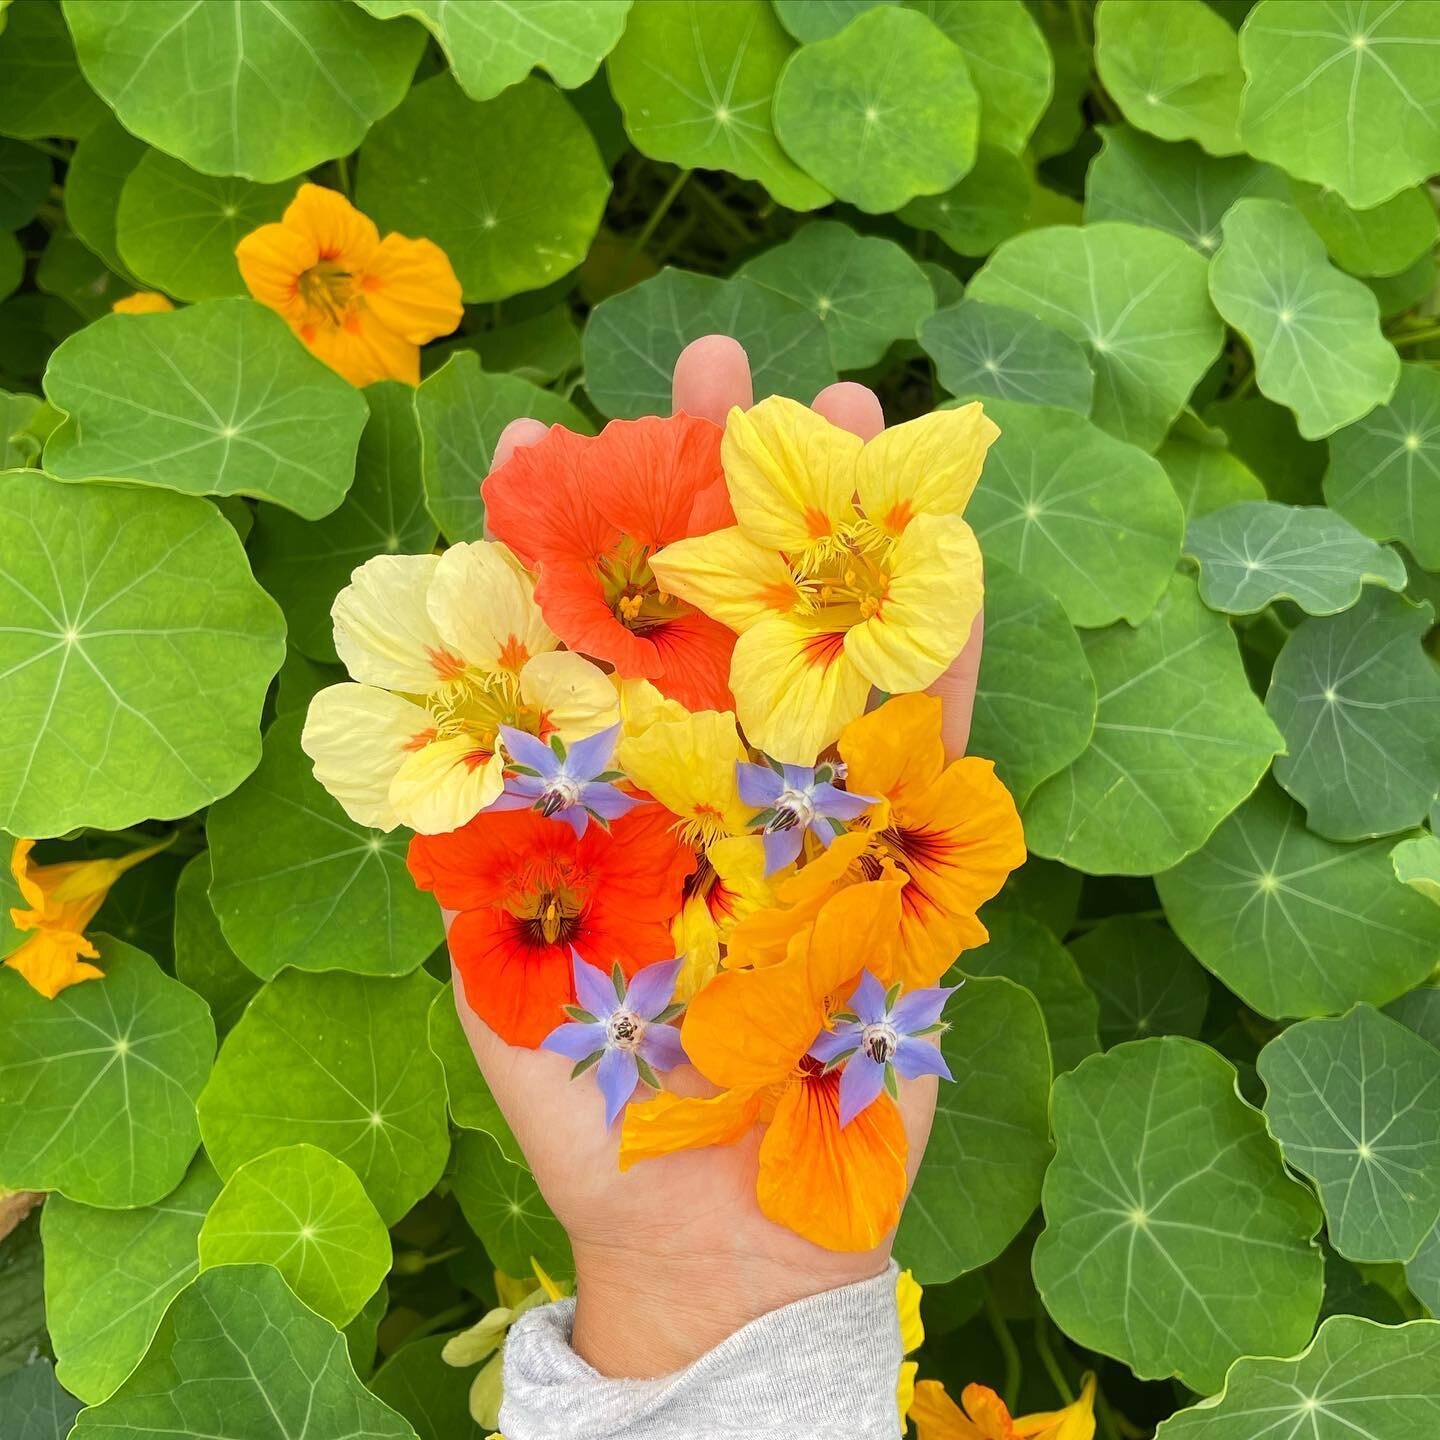 Edible flowers 🌼

Get edible flower plants from us so you grow your own all summer long! We have nasturtium, borage, bachelors button &amp; calendula. Use them to top salads, dessert, cocktails &amp; more